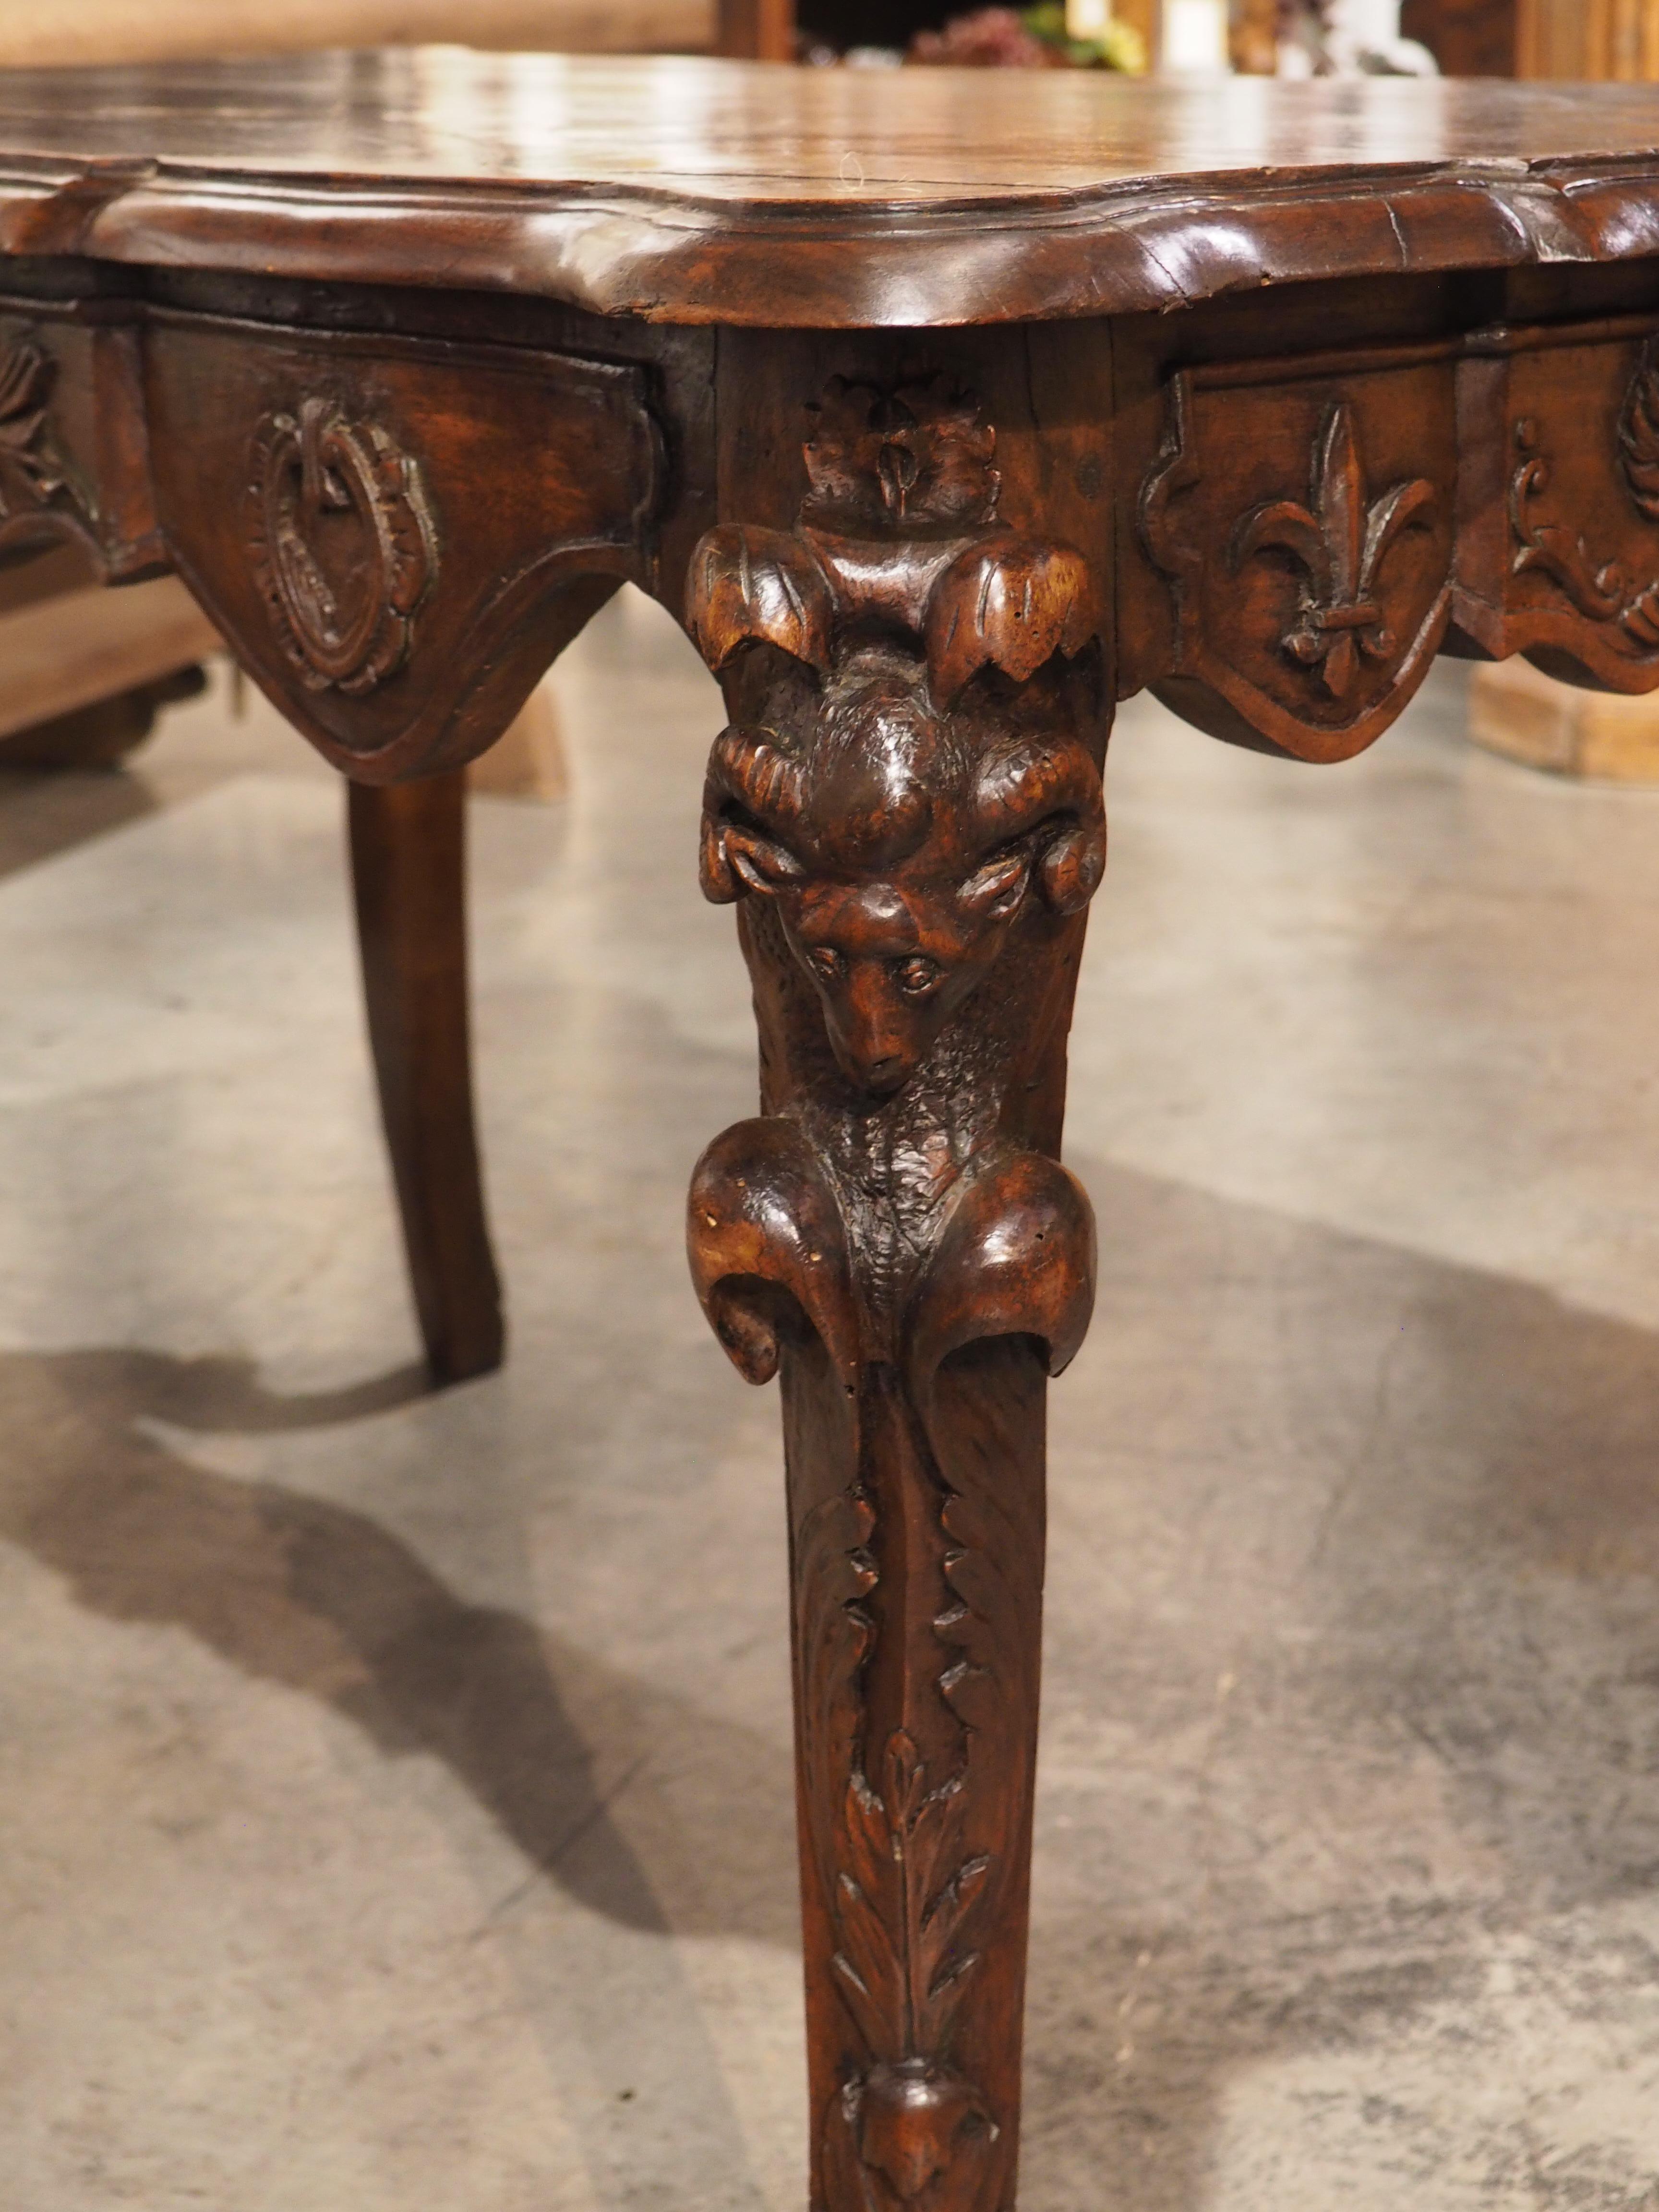 This unusual and interesting center table was produced in France, during the middle of the latter half of the 19th century. It was during this time that French furniture makers, designers, carvers, and carpenters were able to freely re-imagine and